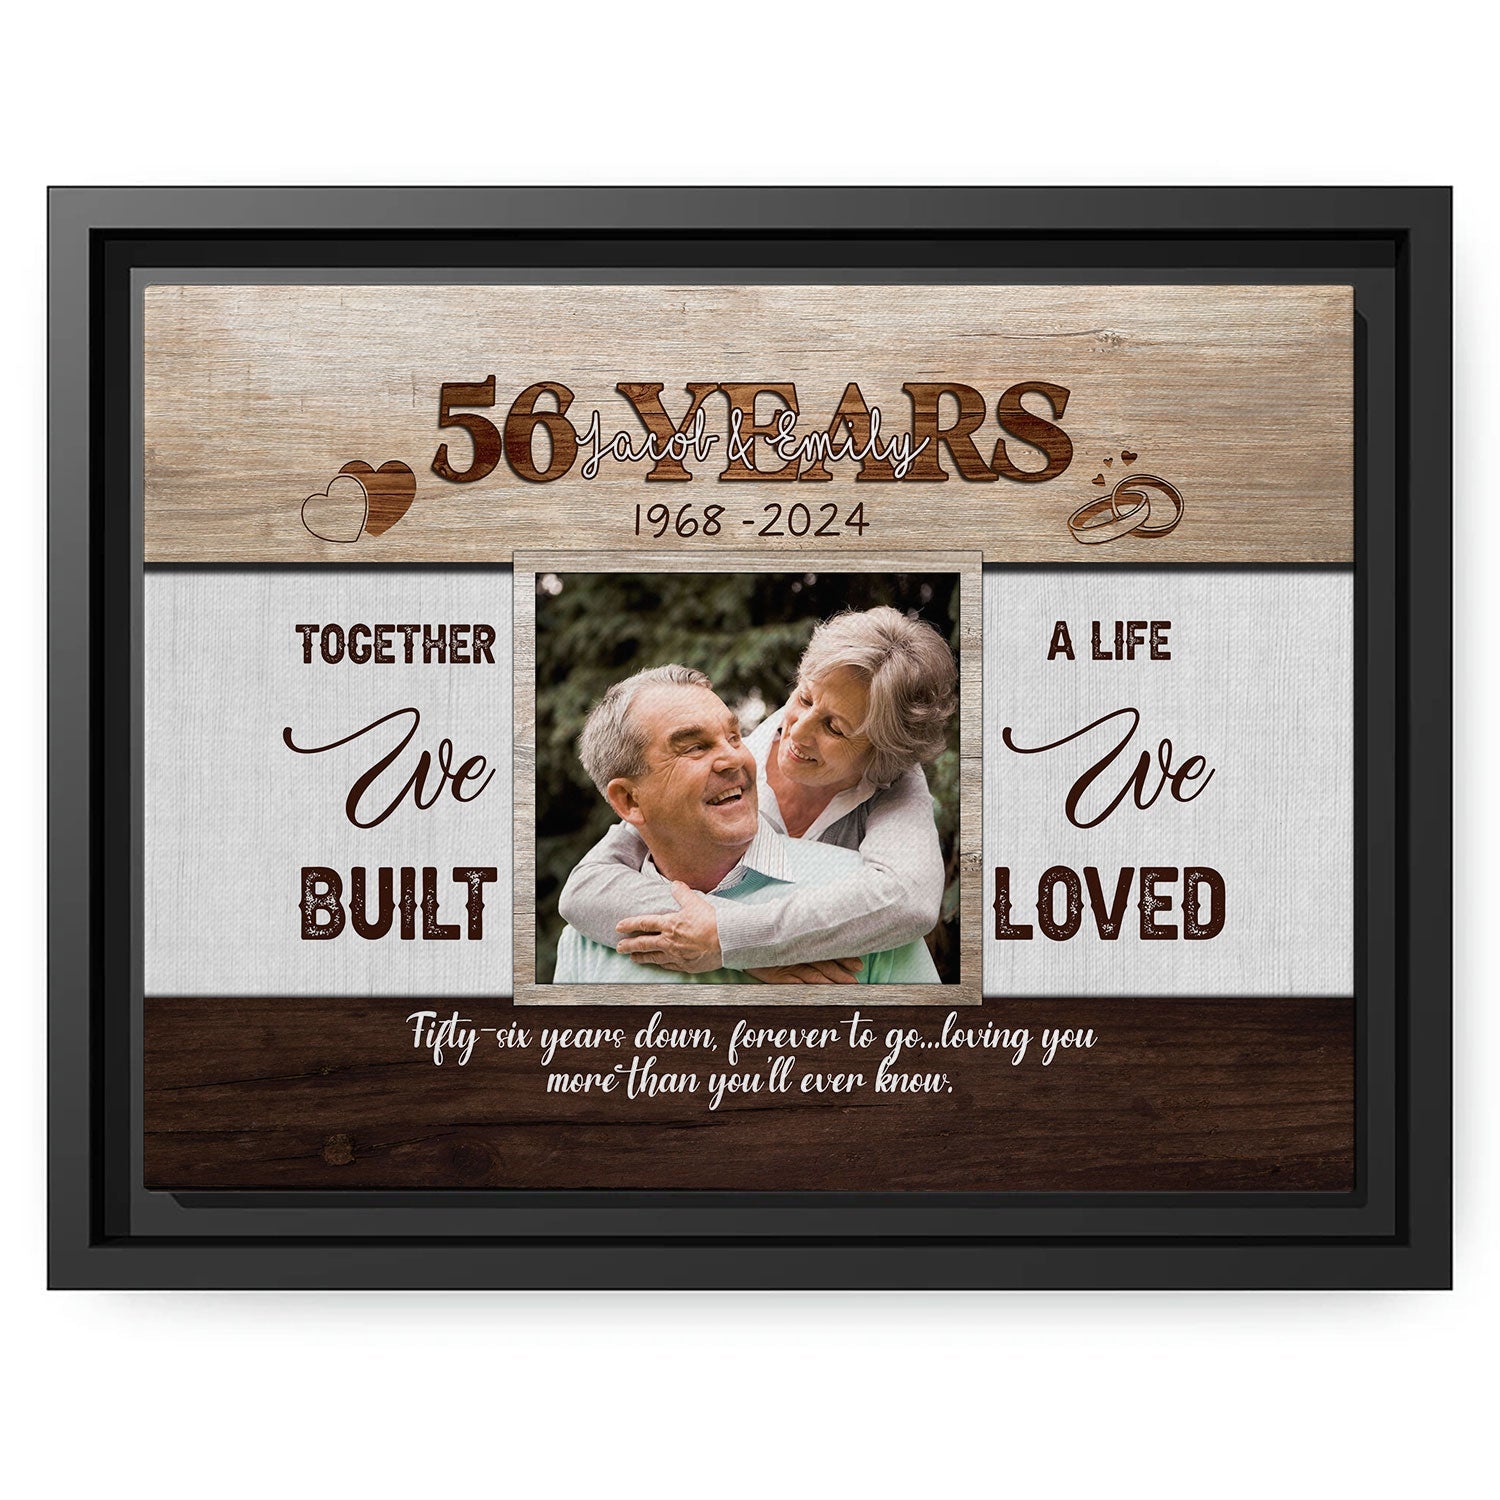 Fifty-six Years Forever To Go - Personalized 56 Year Anniversary gift For Husband or Wife - Custom Canvas Print - MyMindfulGifts